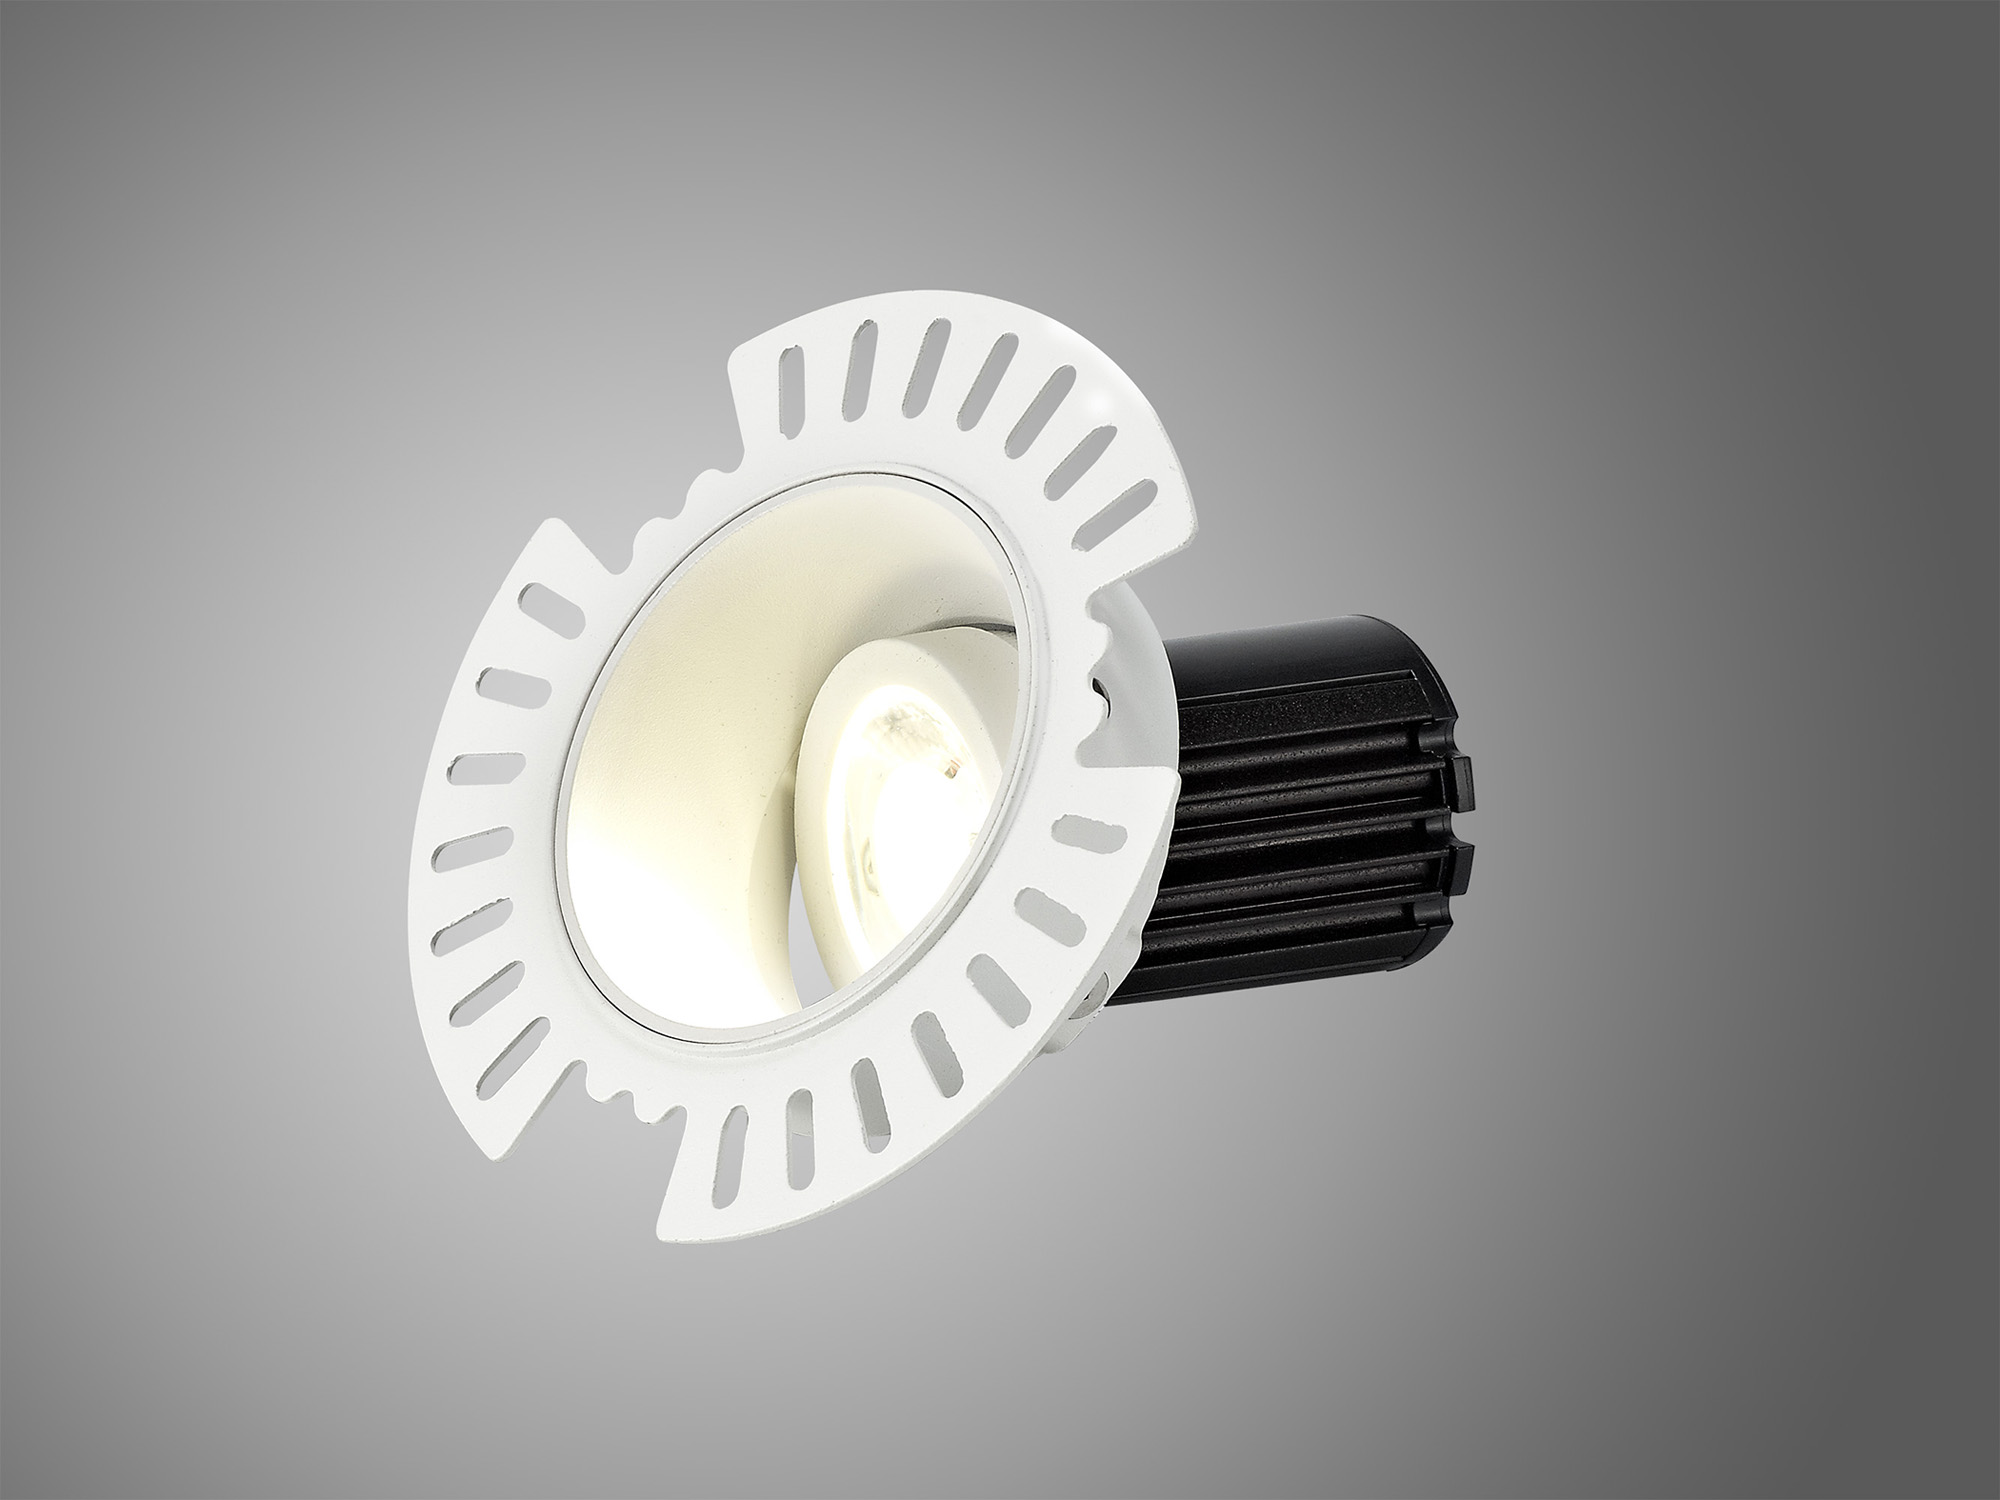 Basy A 10 Recessed Ceiling Luminaires Dlux Round Recess Ceiling